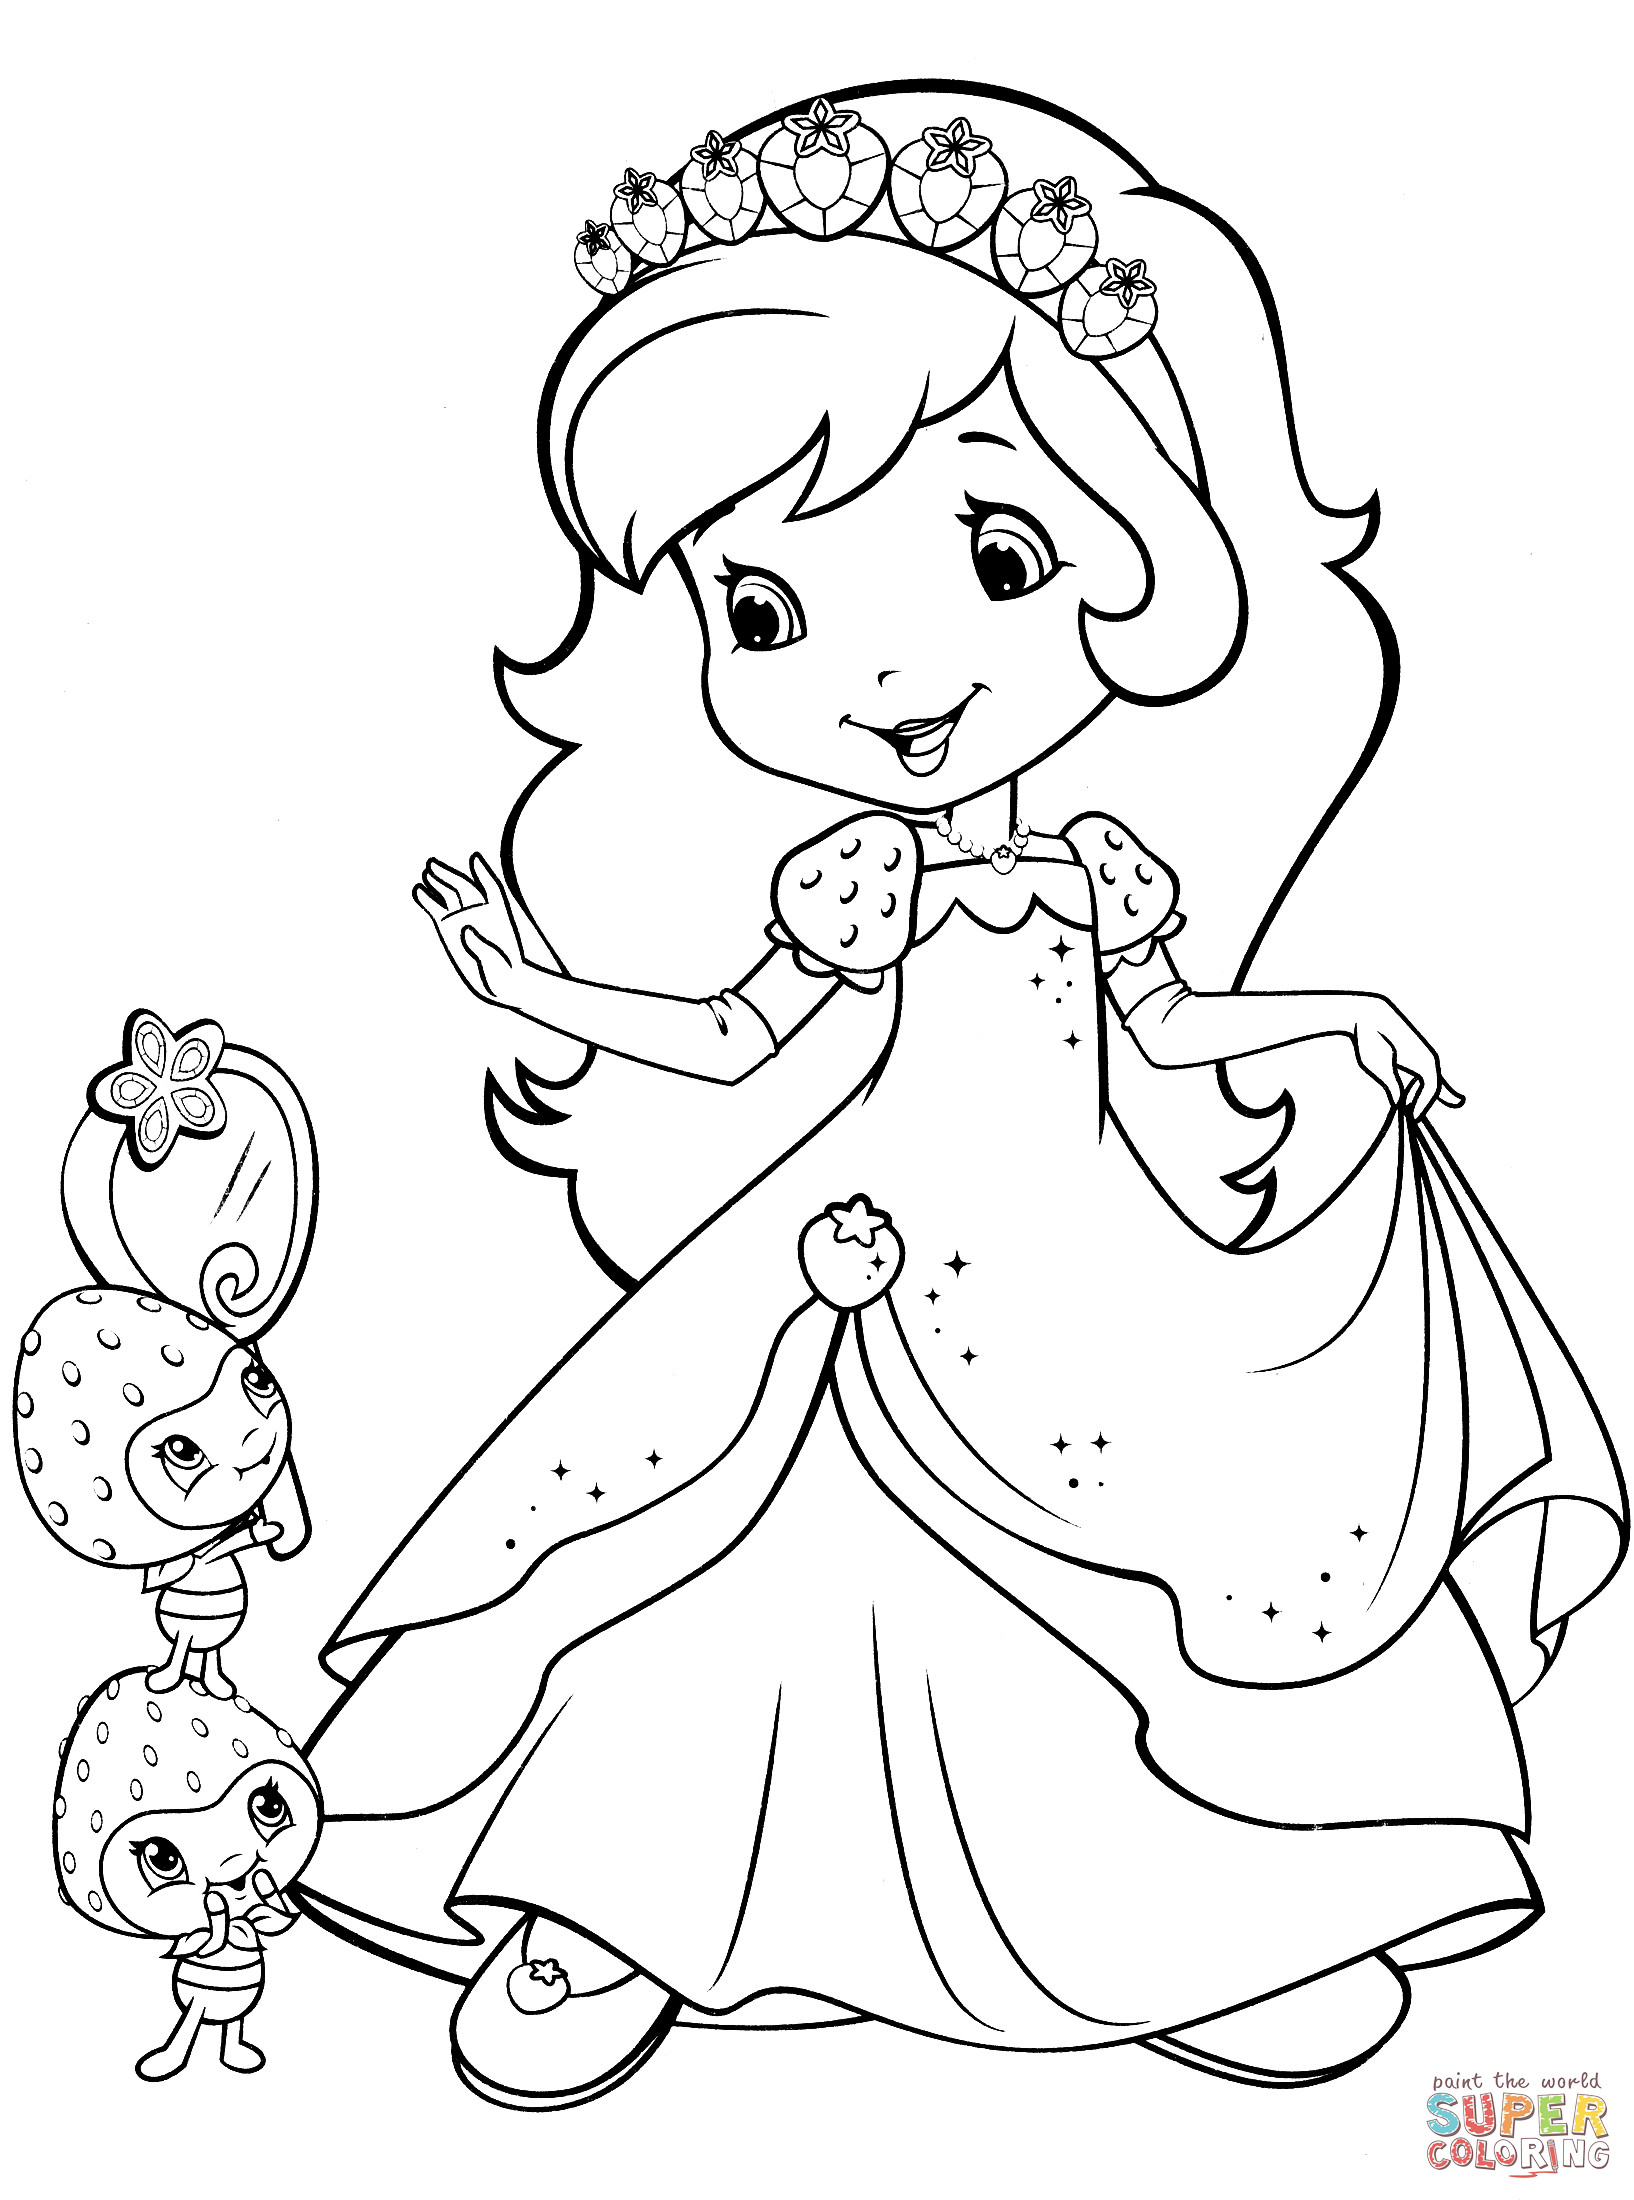 Strawberry Shortcake Printable Coloring Pages
 Strawberry Shortcake and Berrykins coloring page